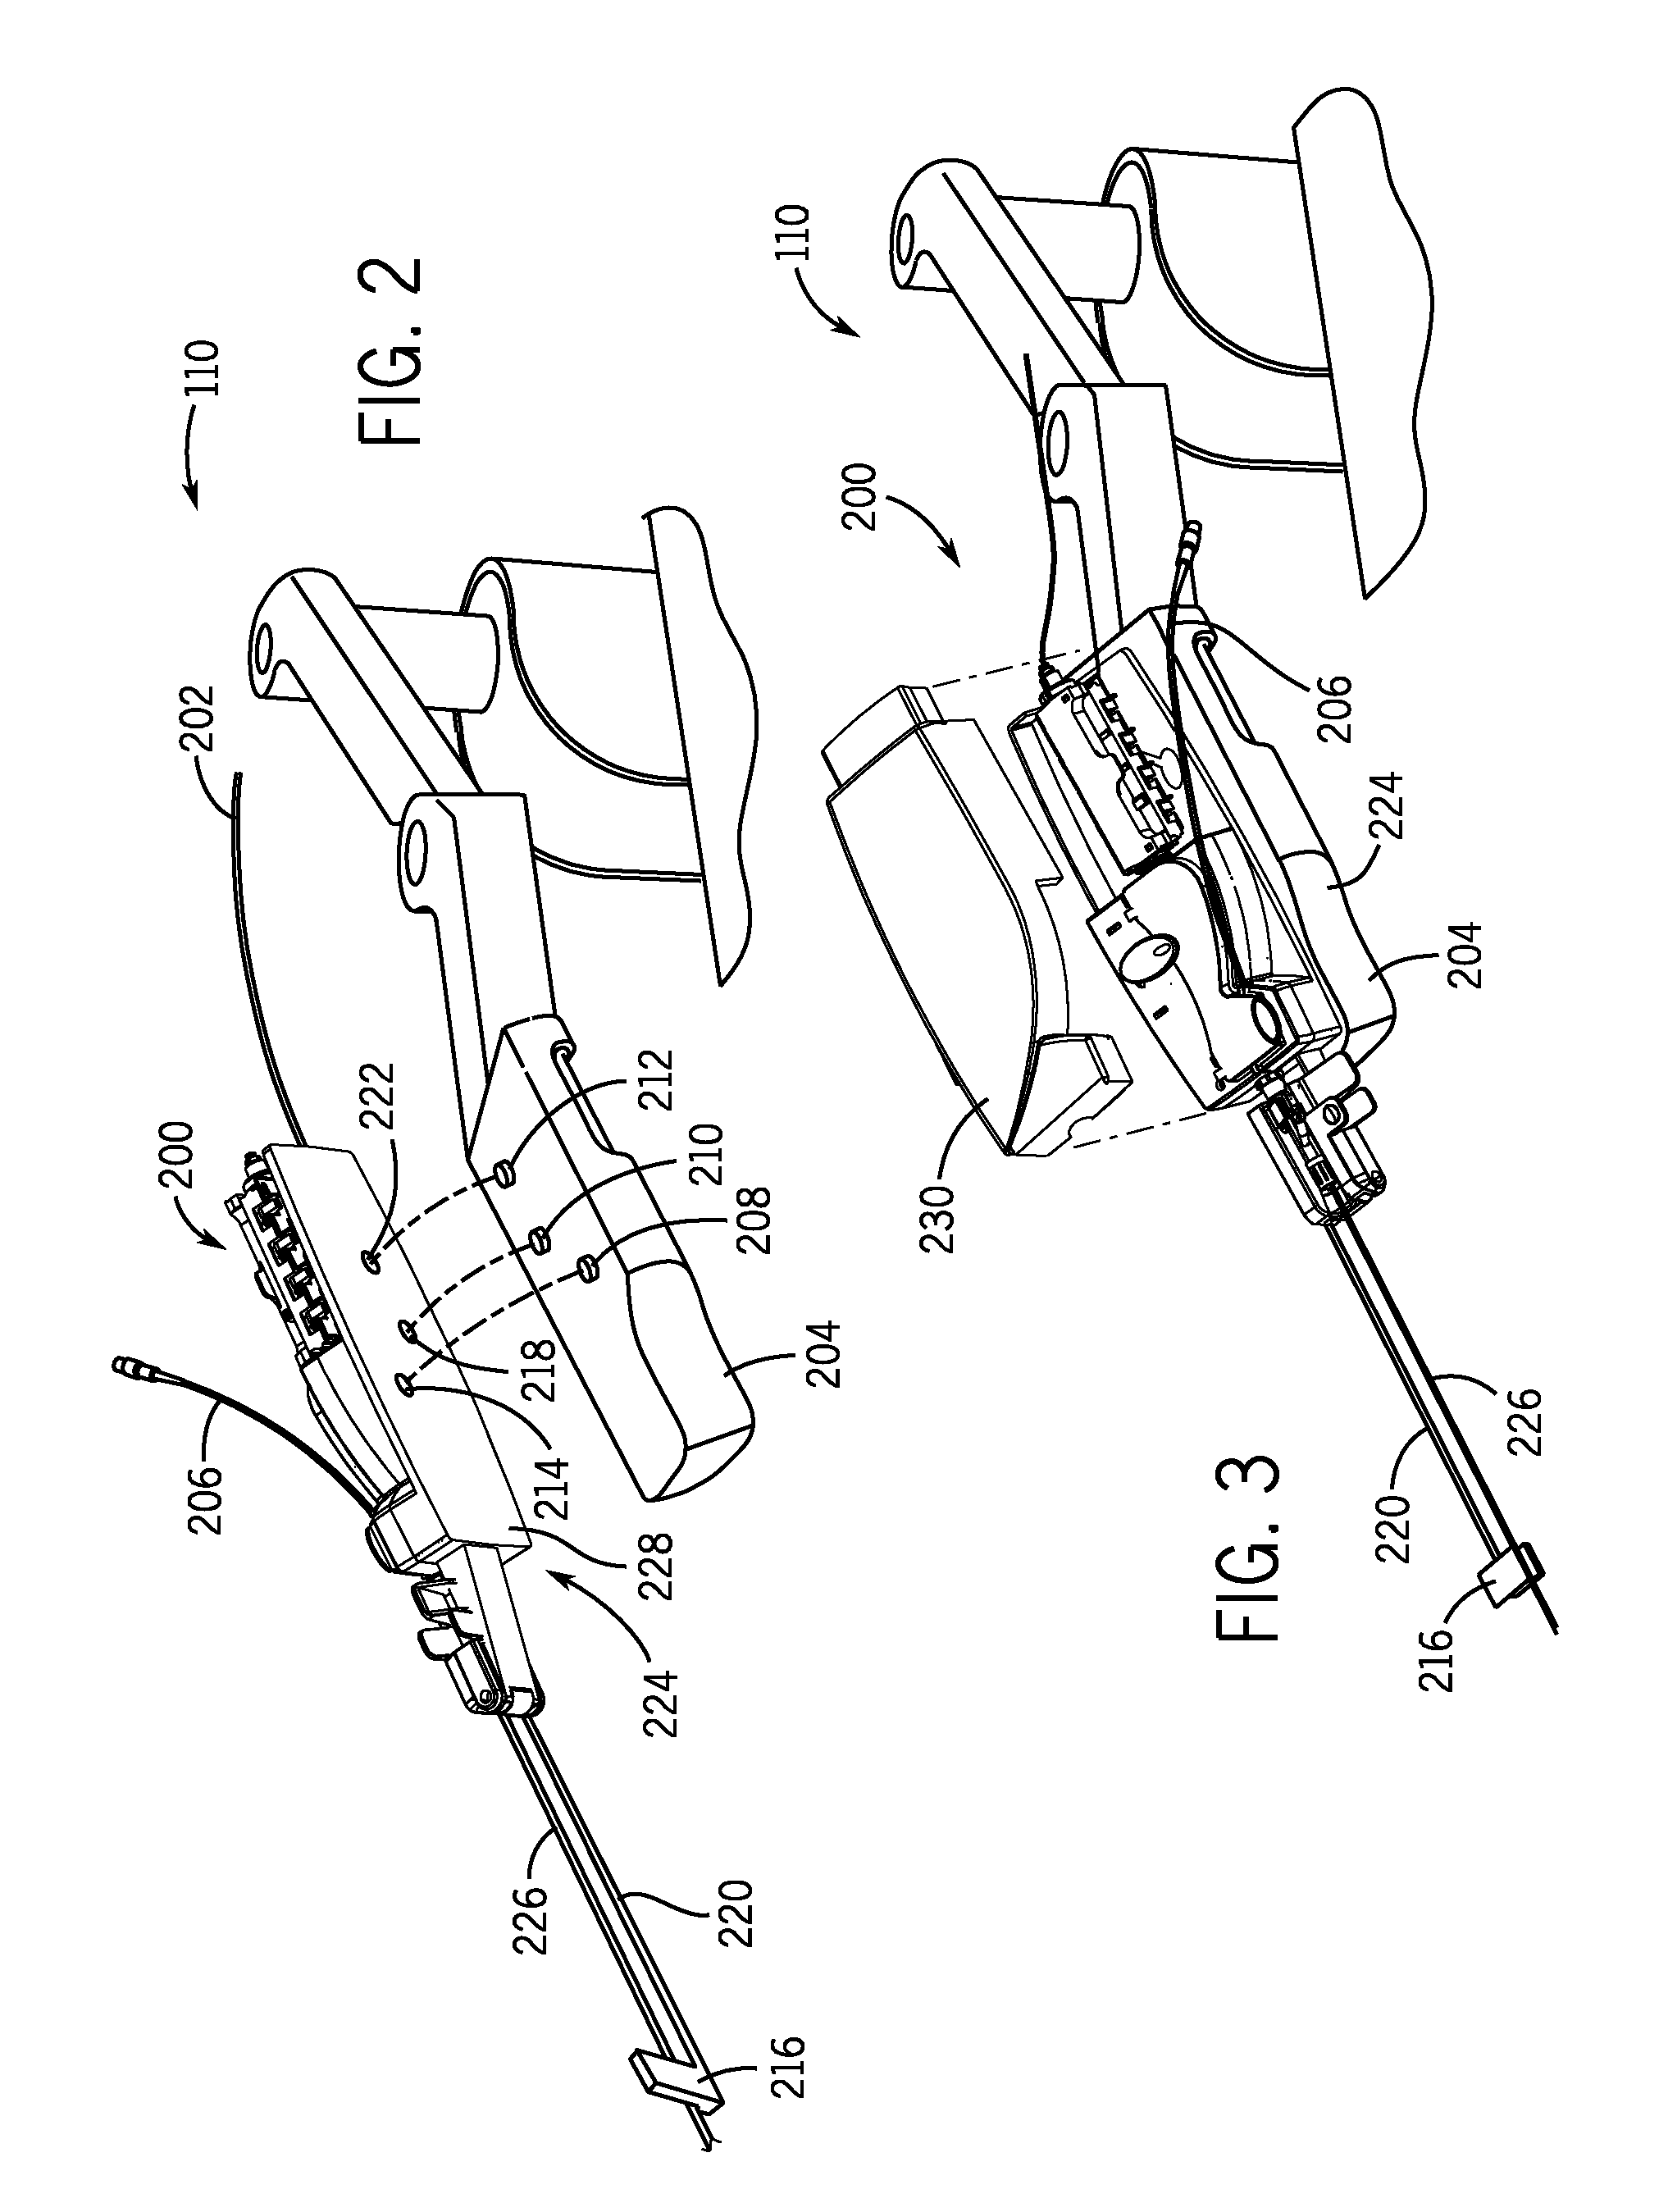 System and method for controlling a motor in a catheter procedure system